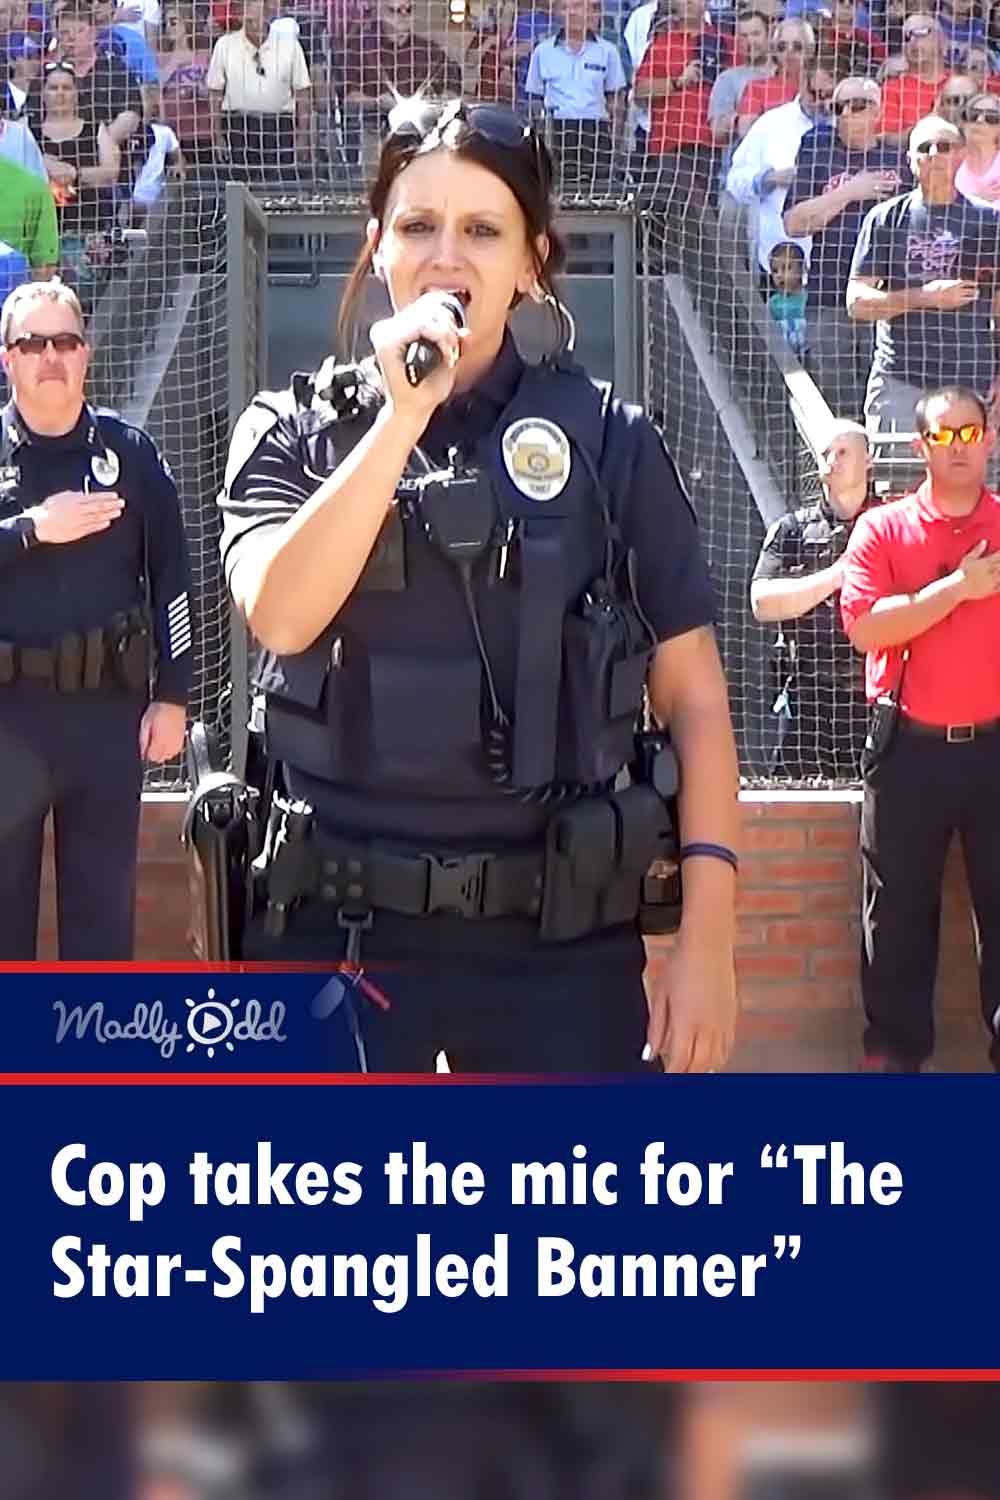 Cop takes the mic for “The Star-Spangled Banner”